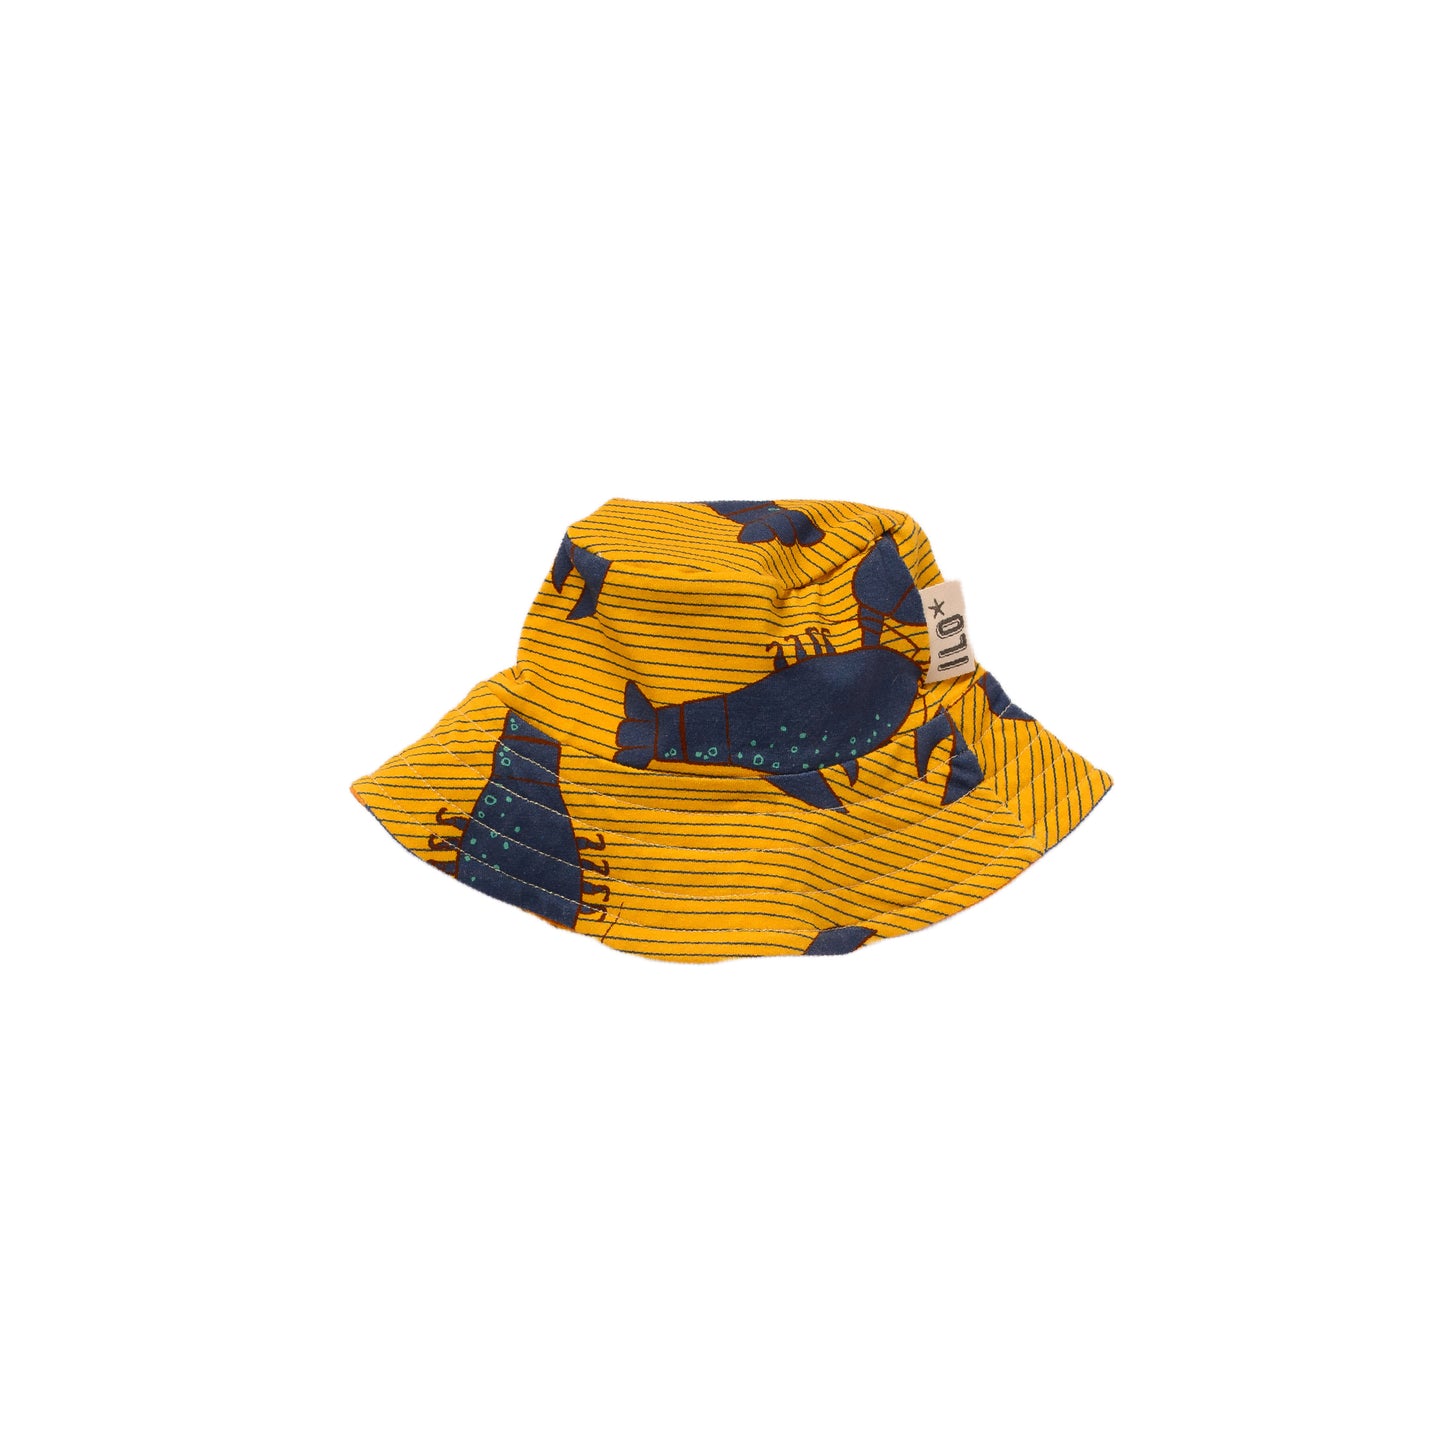 sunhat bucket style, reversible, with blue lobster on gold onone side, contrasting stripes on the other. Made in Bristol, UK